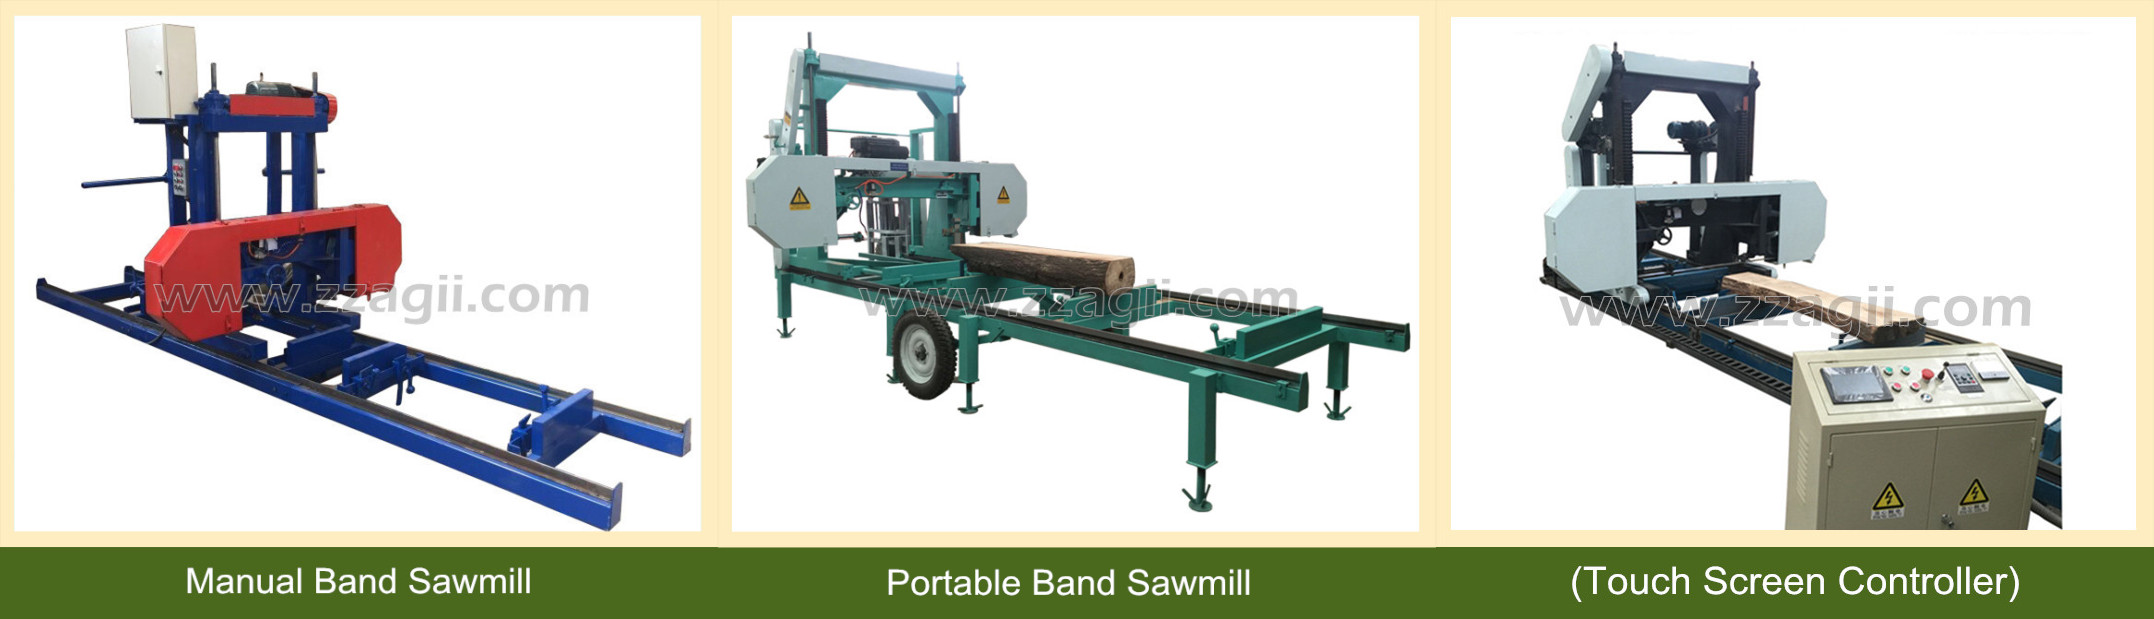 band saw mill for wood cutting